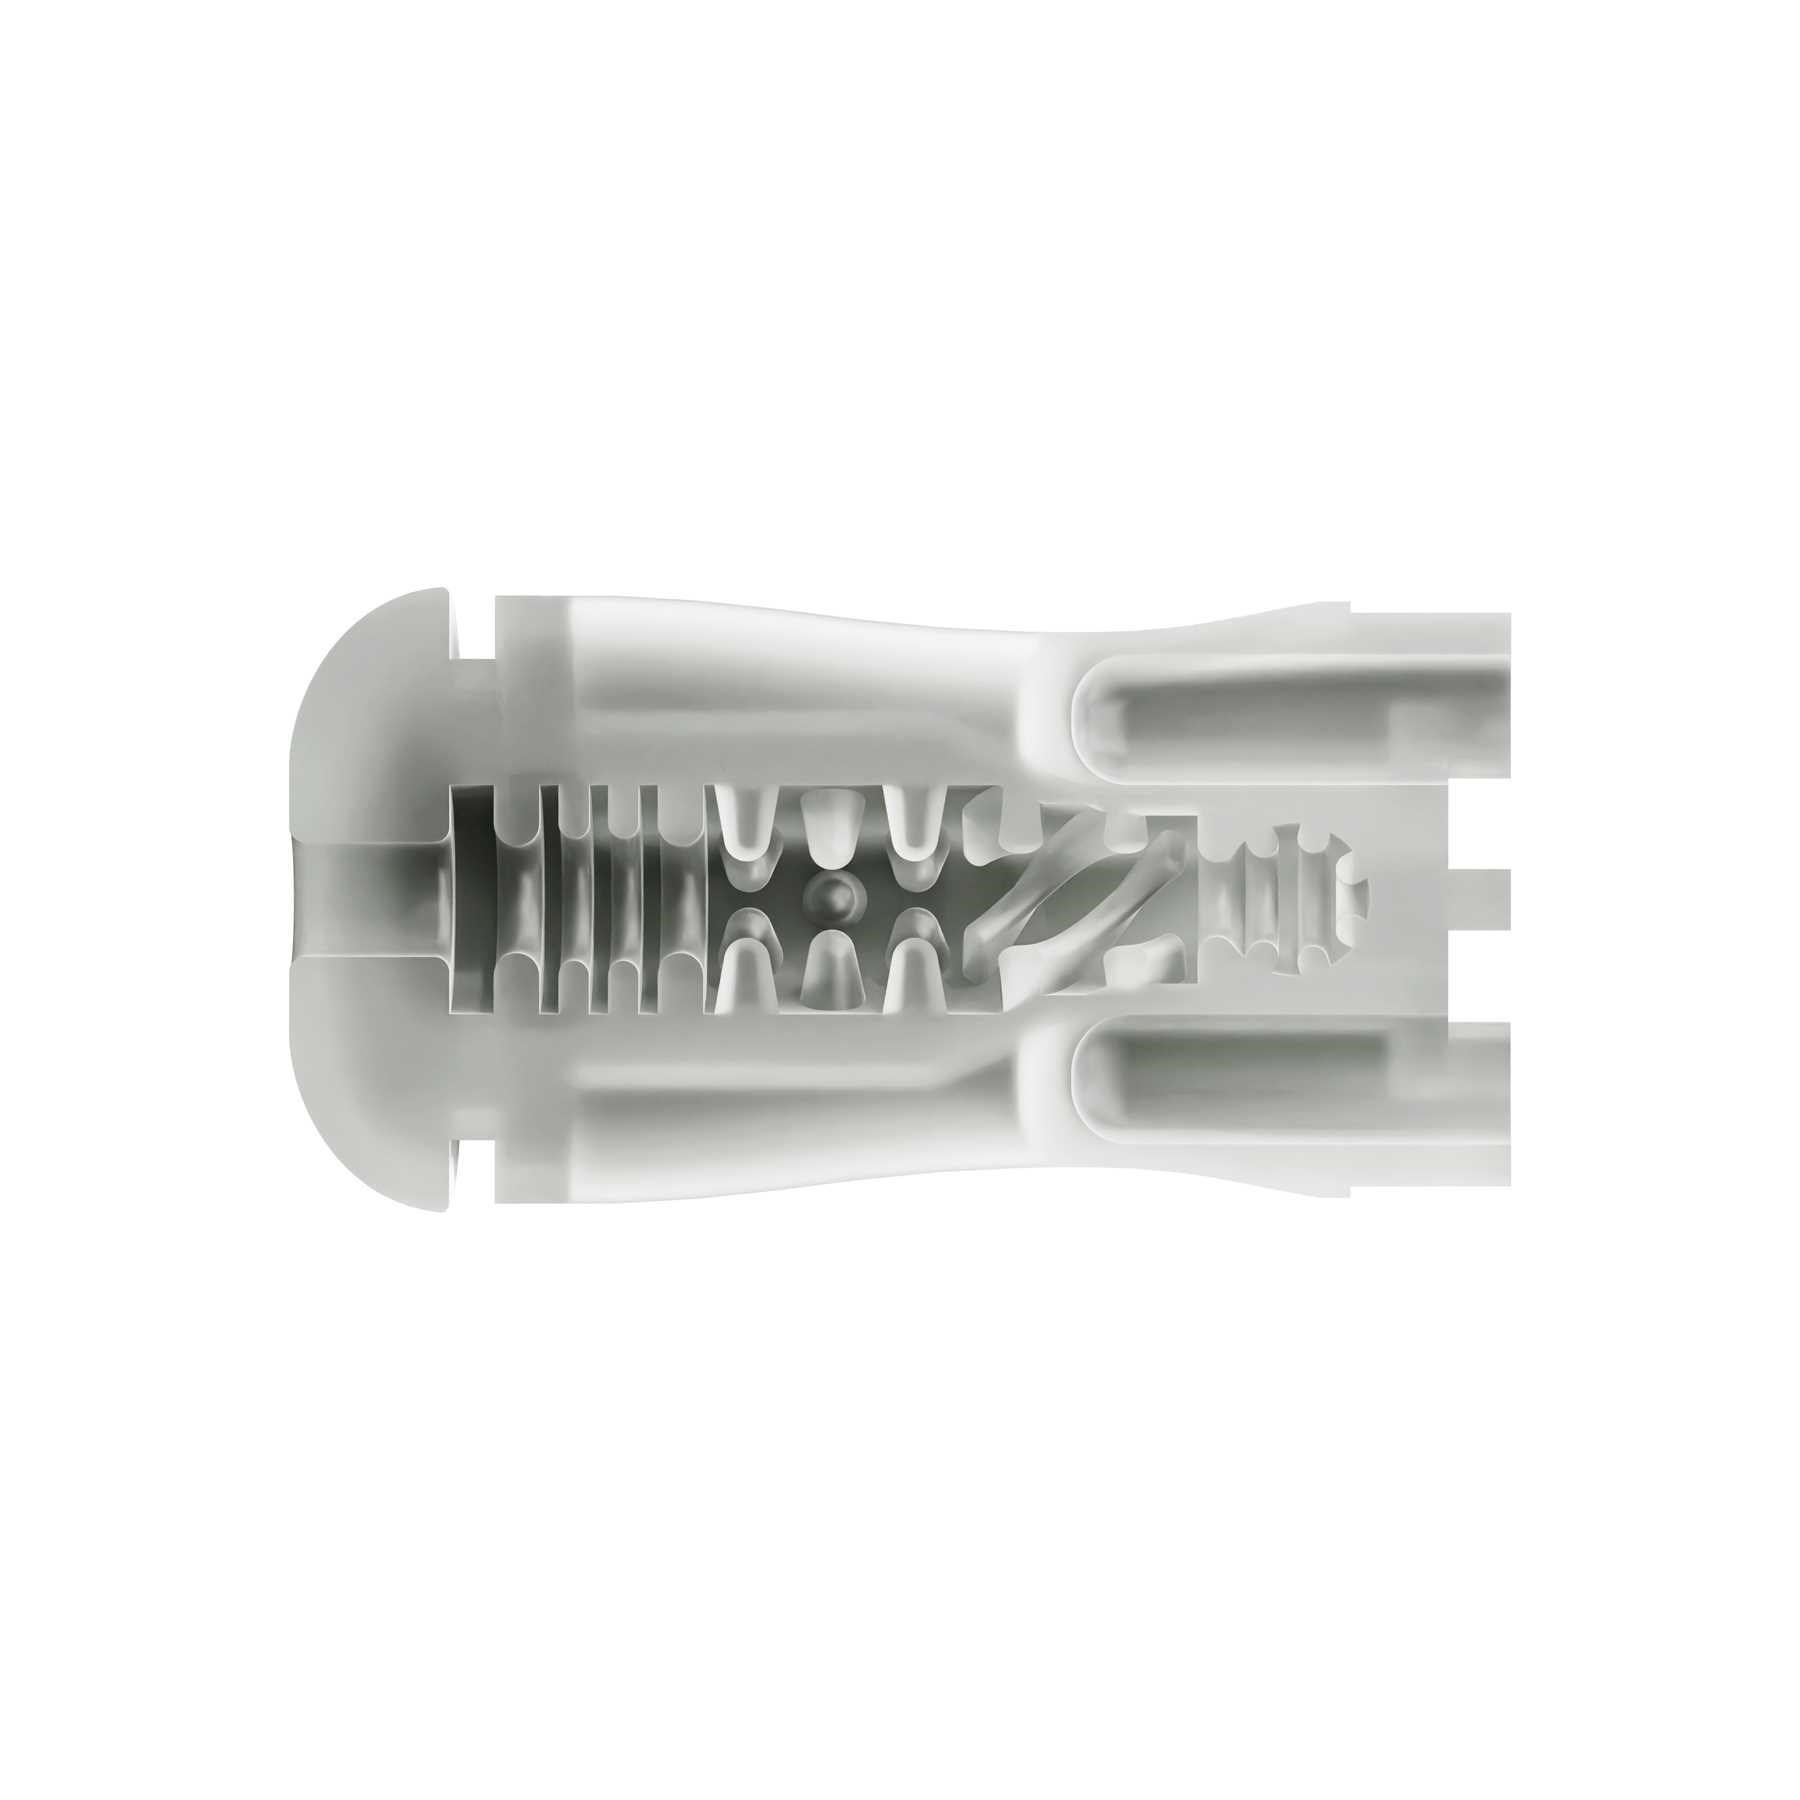 Maxtasy suction master standard clear sleeve cross section on inner tunnel